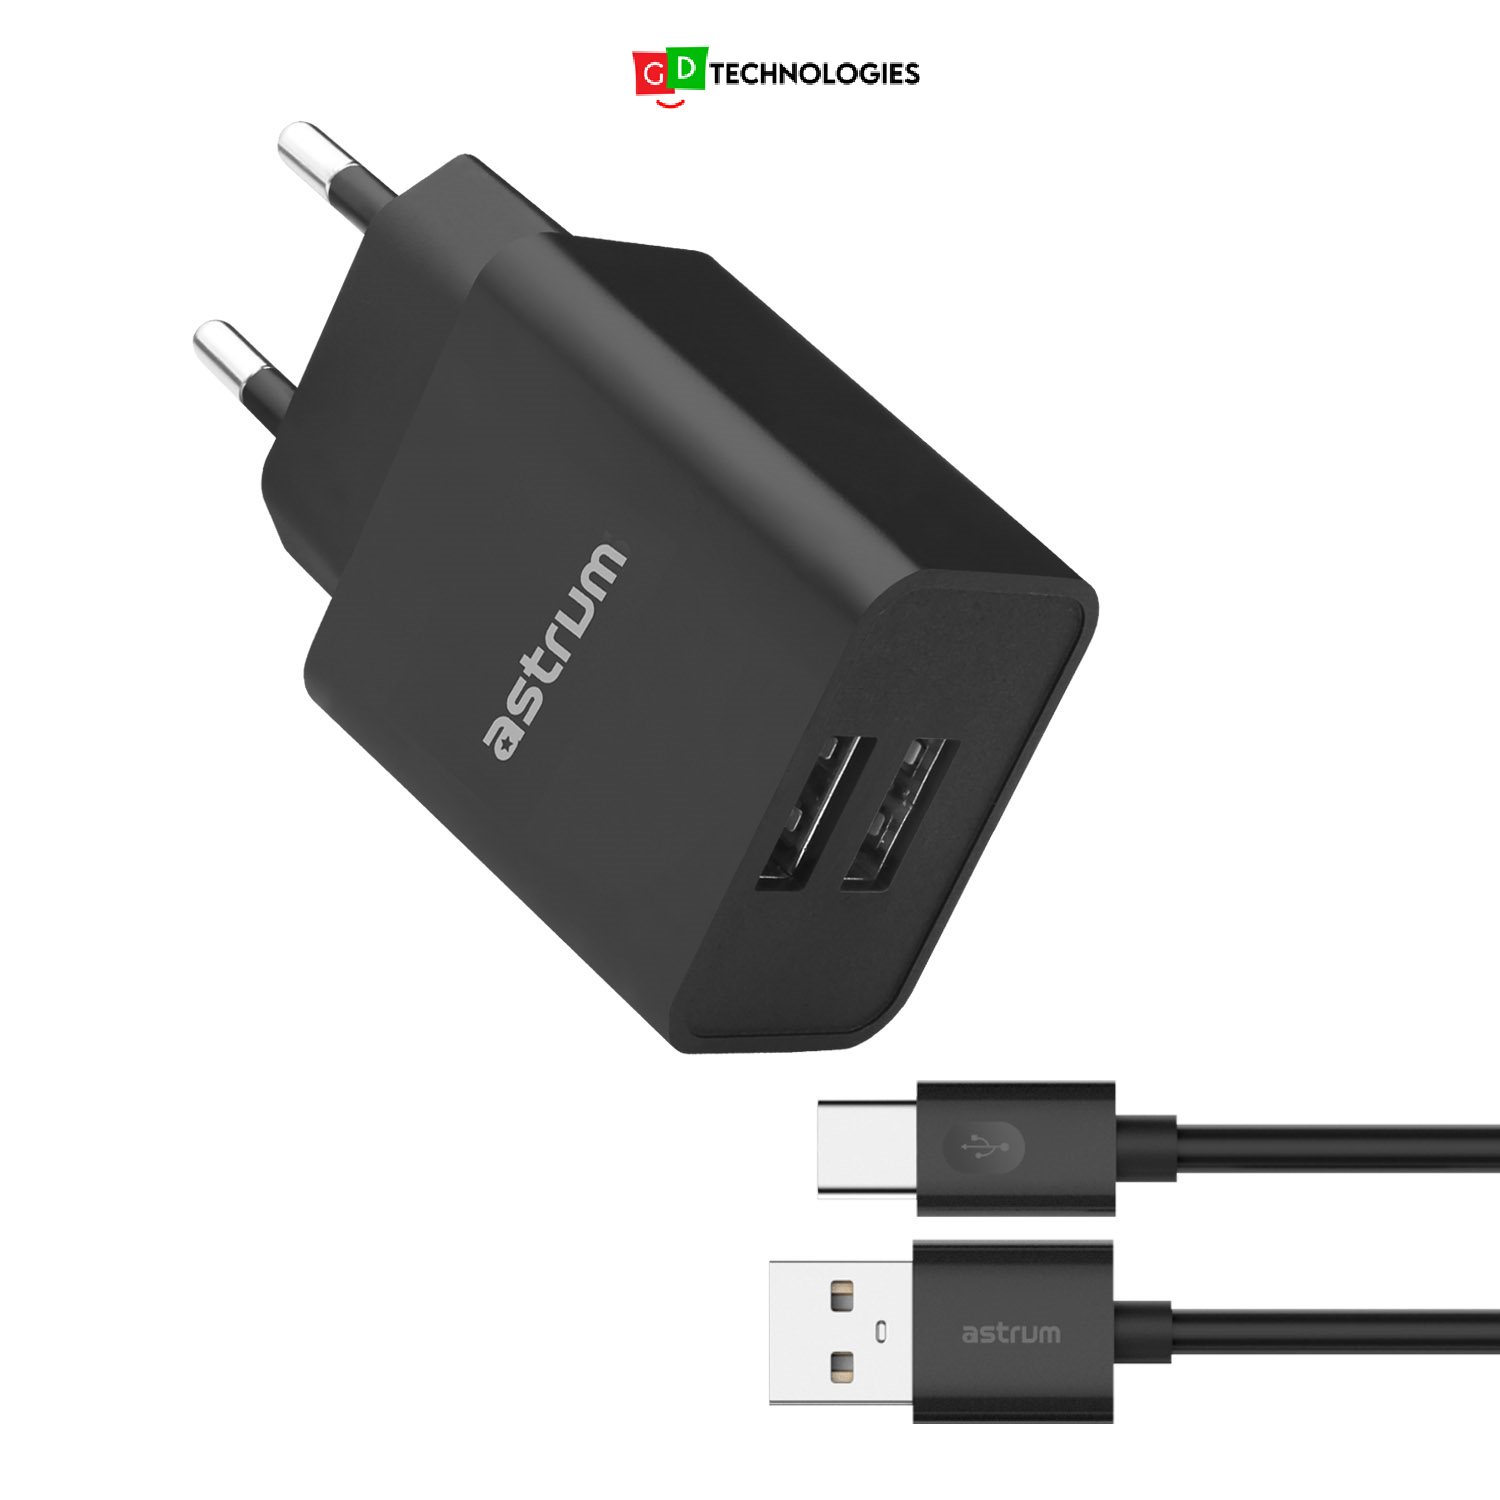 12W Dual USB Travel Wall Charger + USB-C Cable